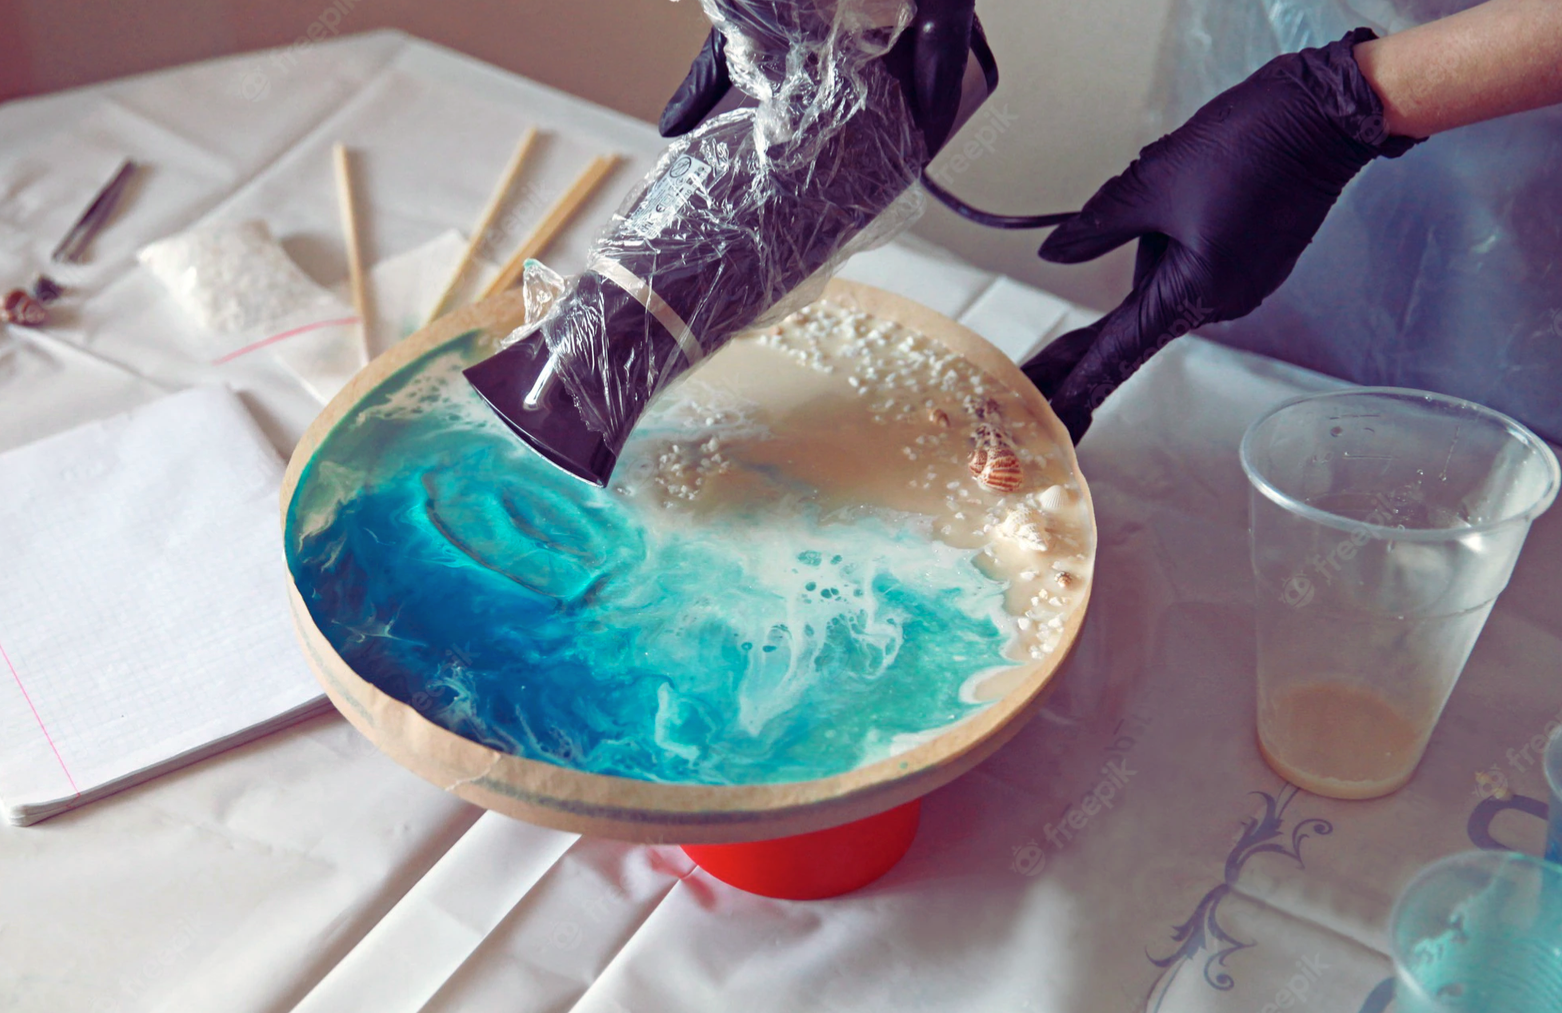 <strong>6 Essential Tips For Working With Epoxy Resin</strong>